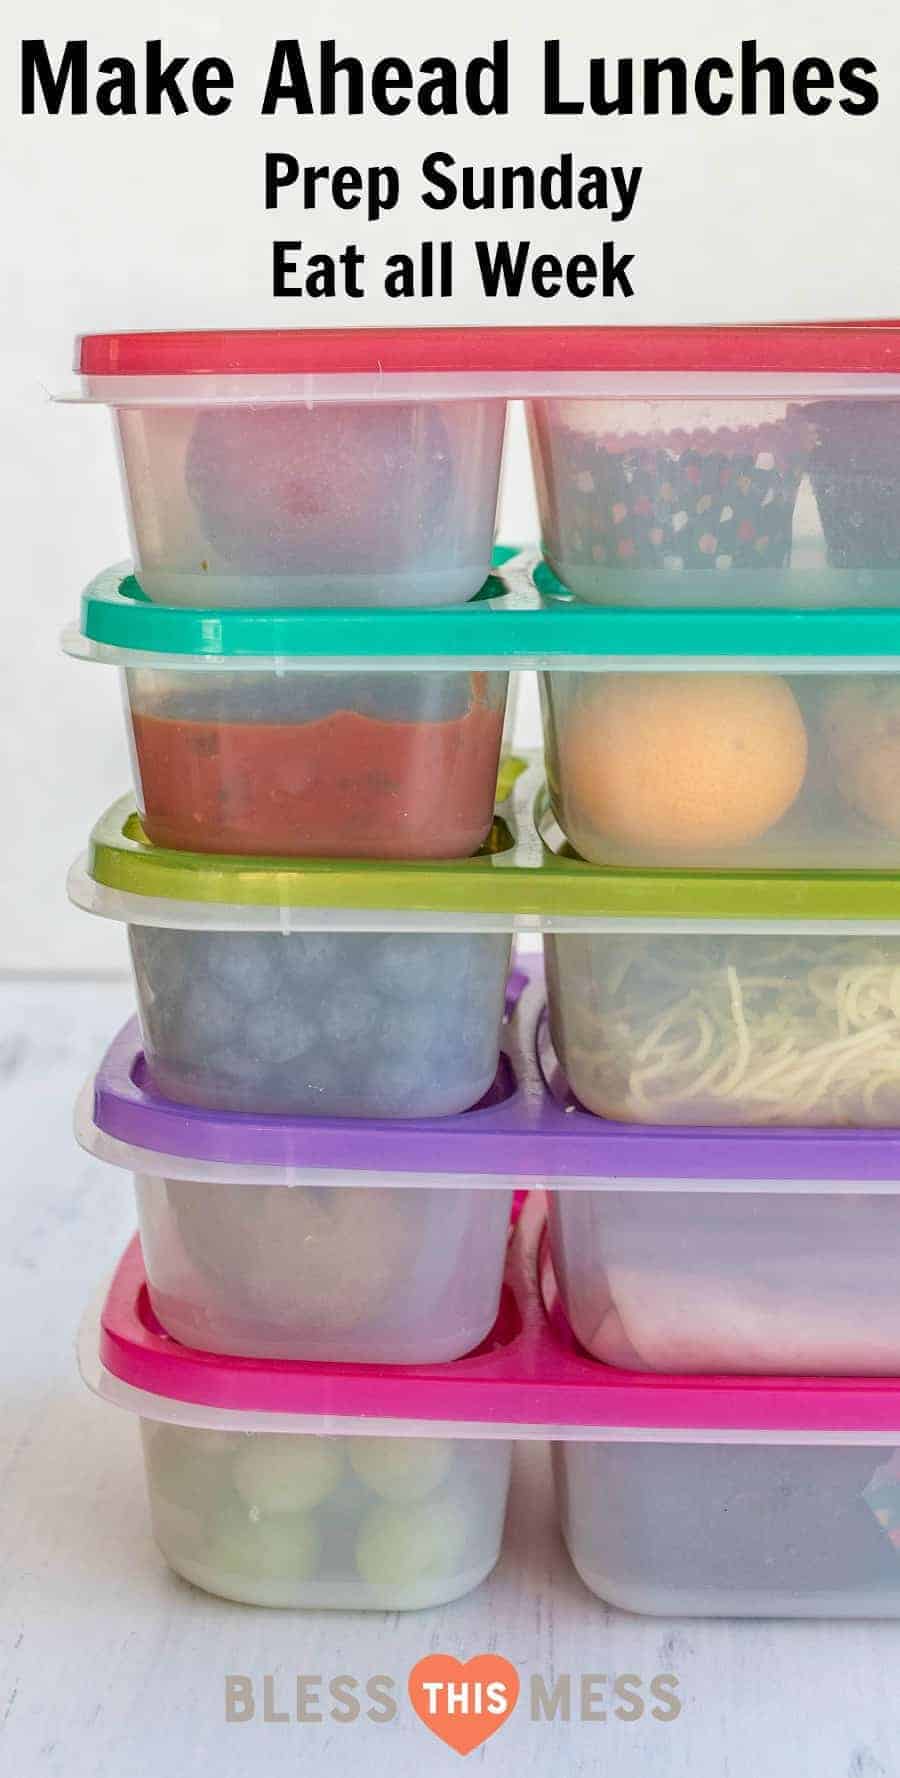 I actually LOVE lunch box packing. And make-ahead lunches are amazing because you put them together on Sunday, and they last until lunch time later in the week! Throw in some Horizon Organic cheese sticks and milk boxes for easy, on-the-go protein. #ad #HorizonOrganic #lunchboxes #packedlunch #makeaheadlunch #lunch #lunchideas